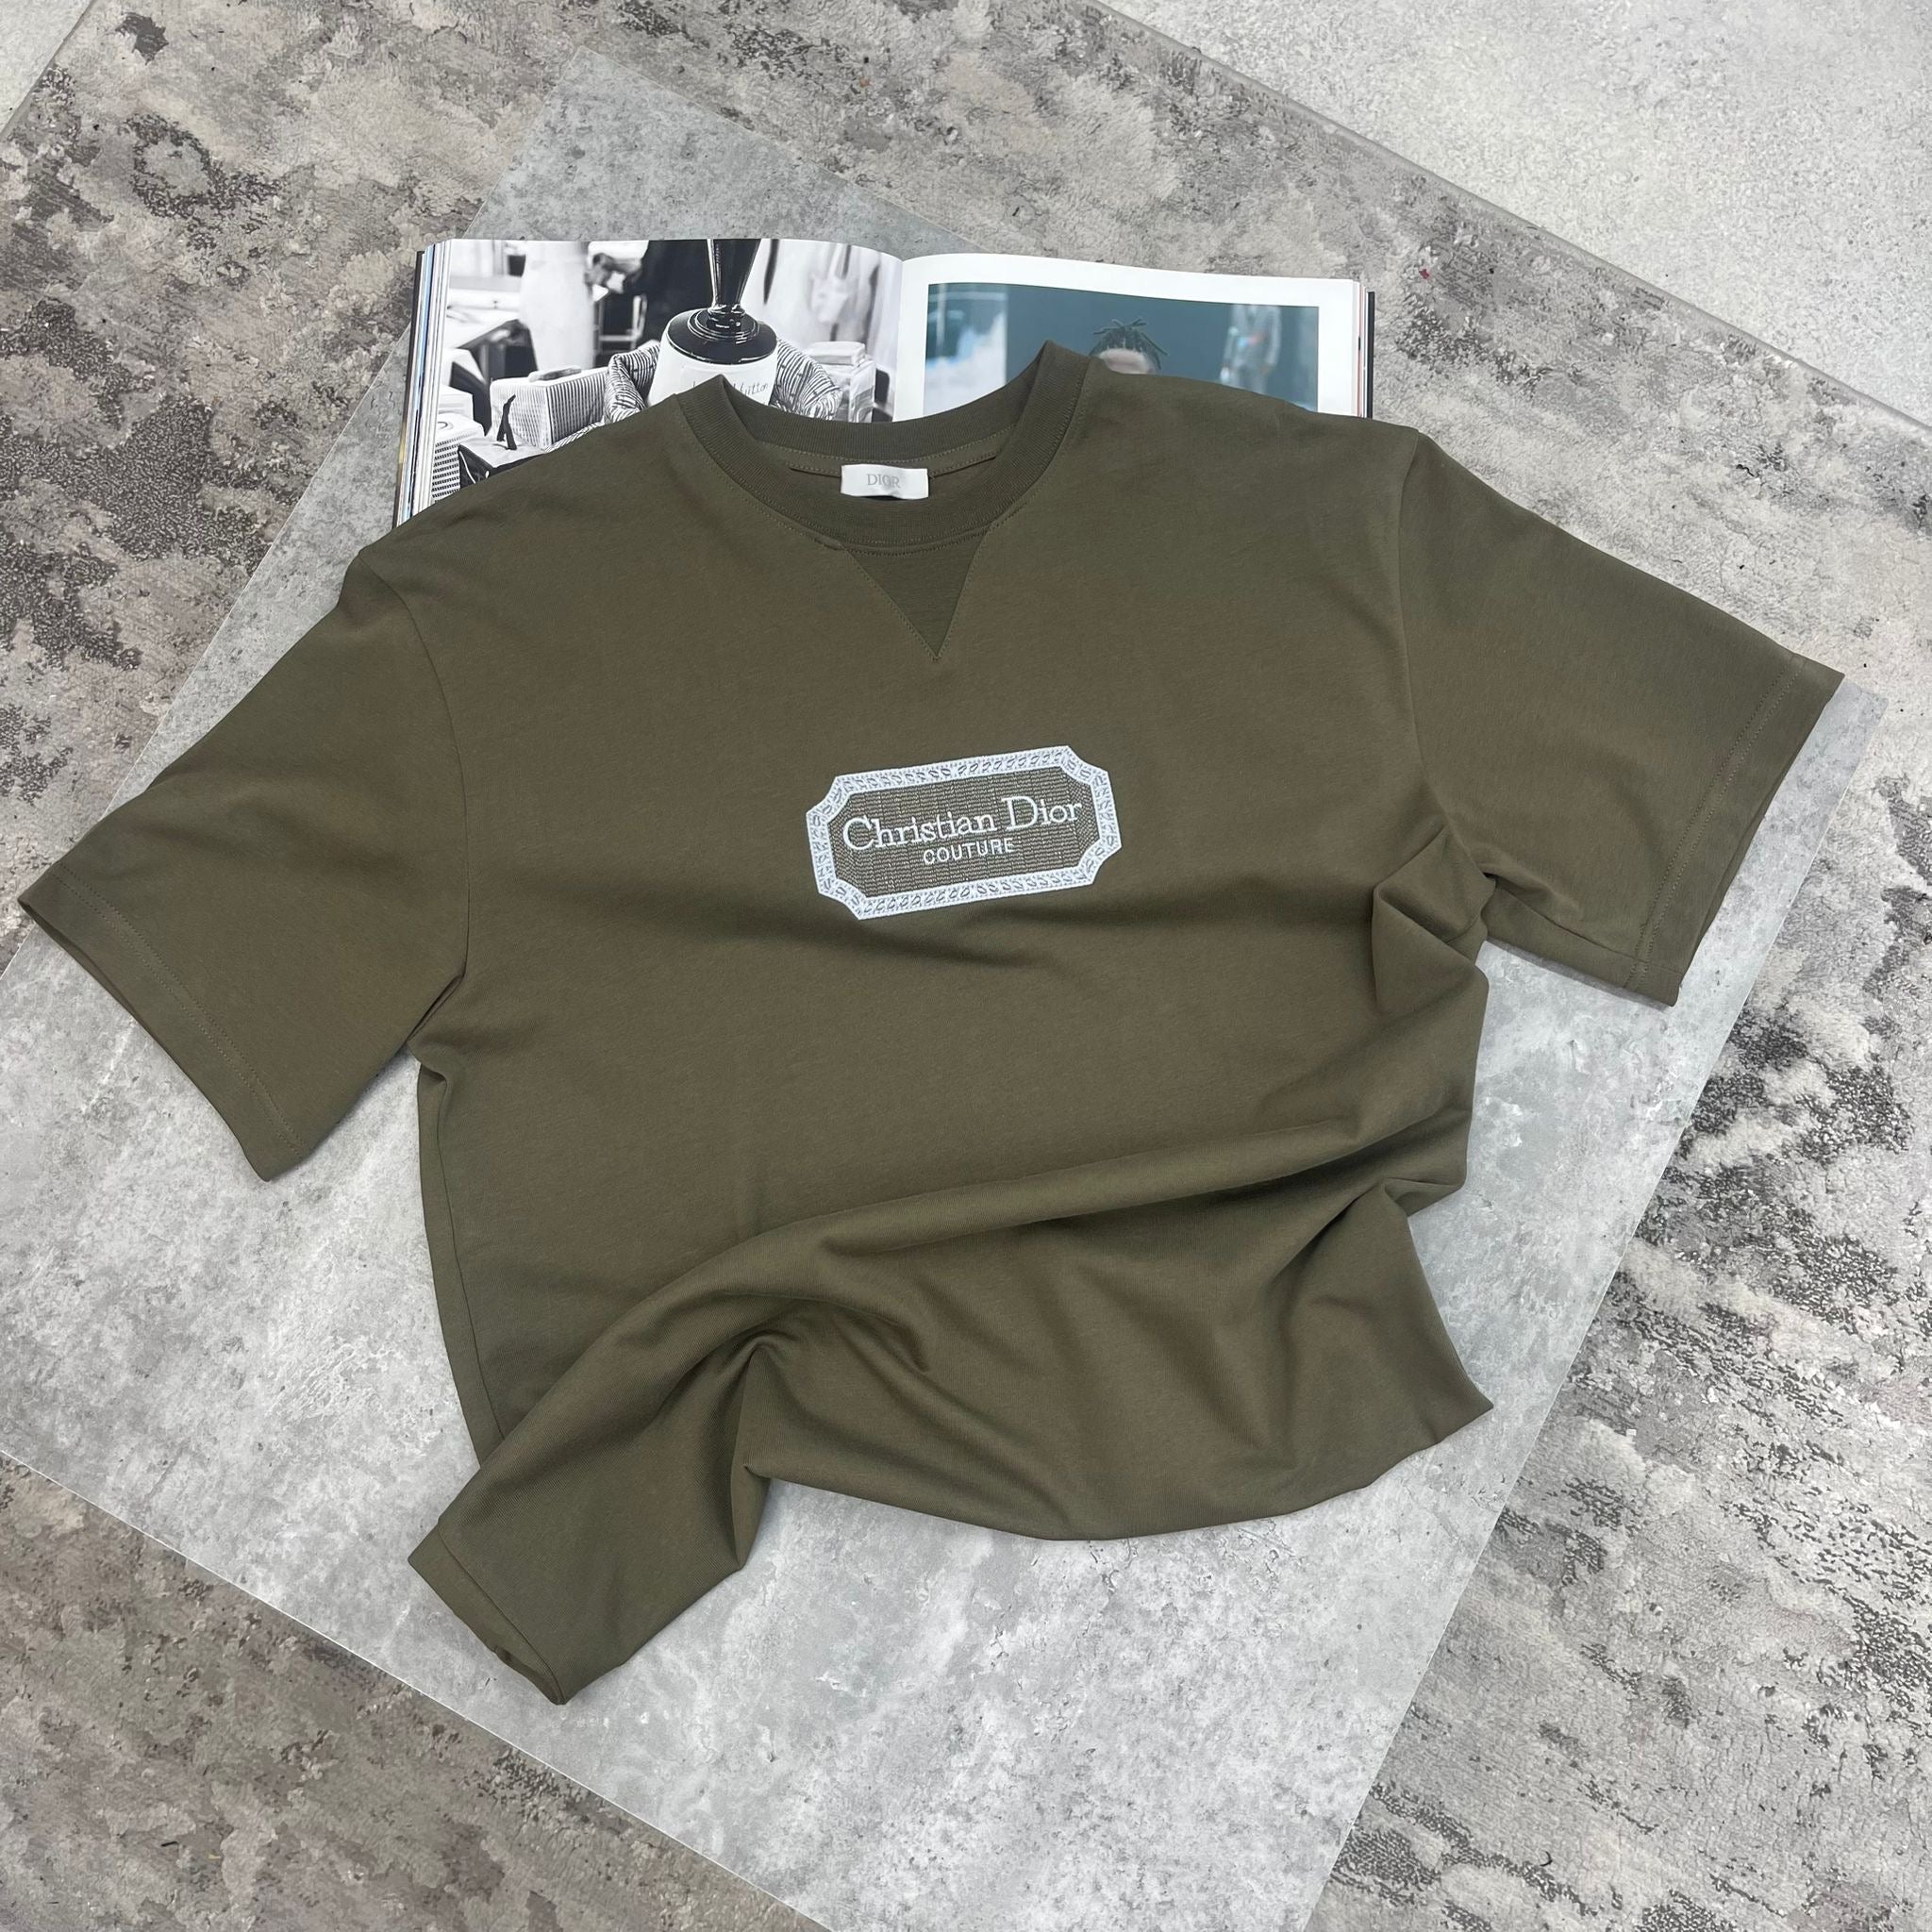 DIOR - COUTURE RELAXED FIT T-SHIRT - KHAKI